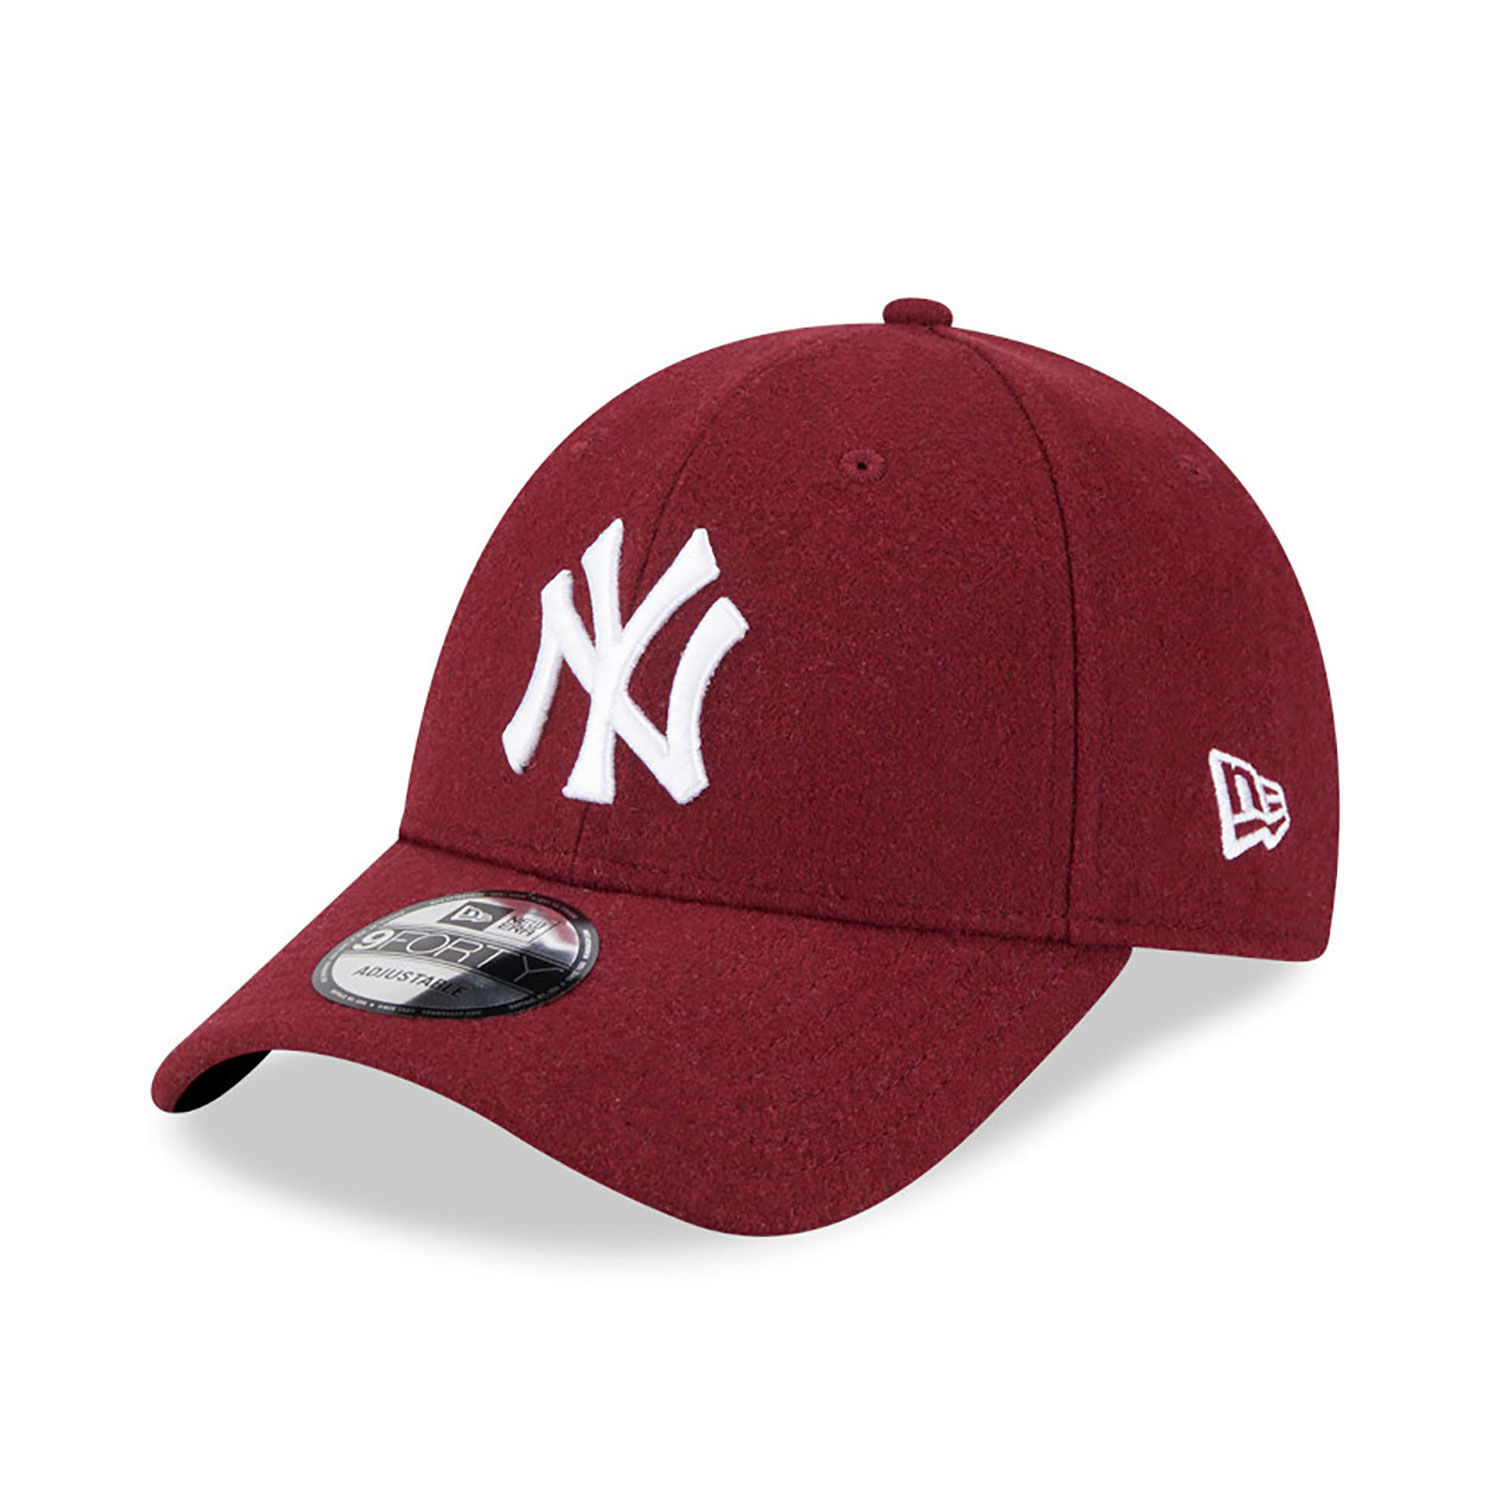 New York Yankees Melton Wool Red 9FORTY Adjustable Cap